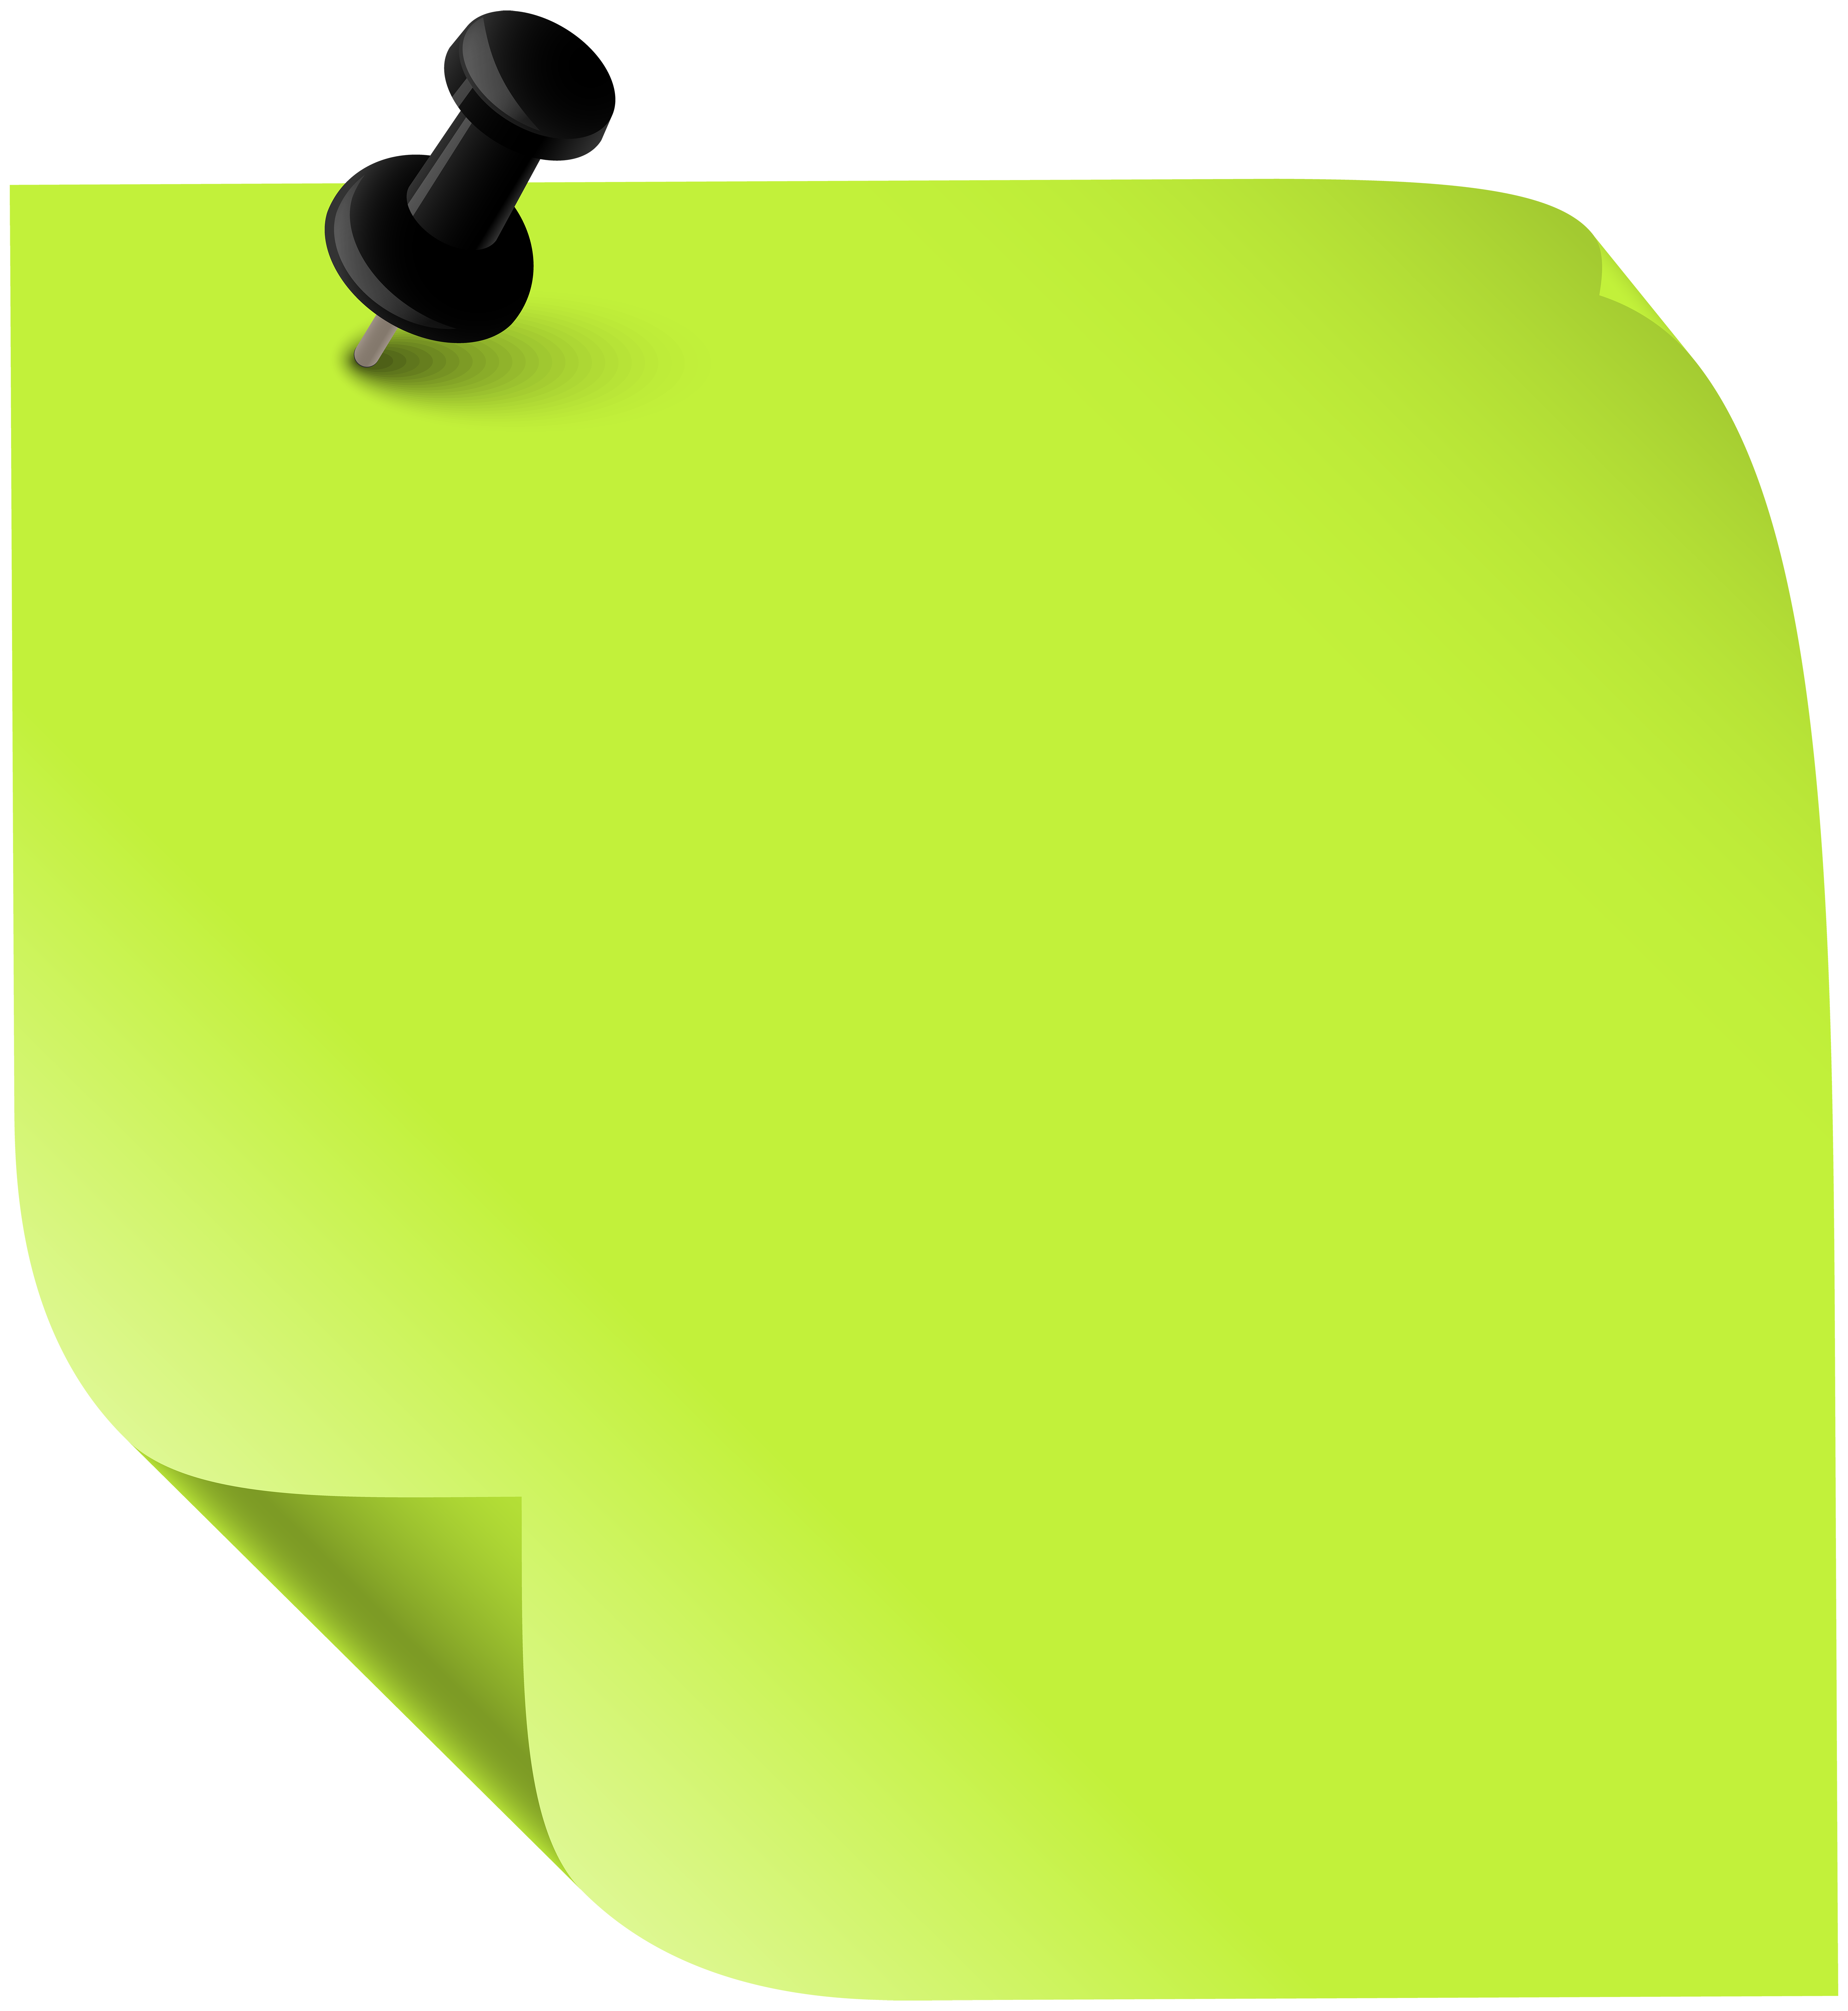 post it note transparent background green